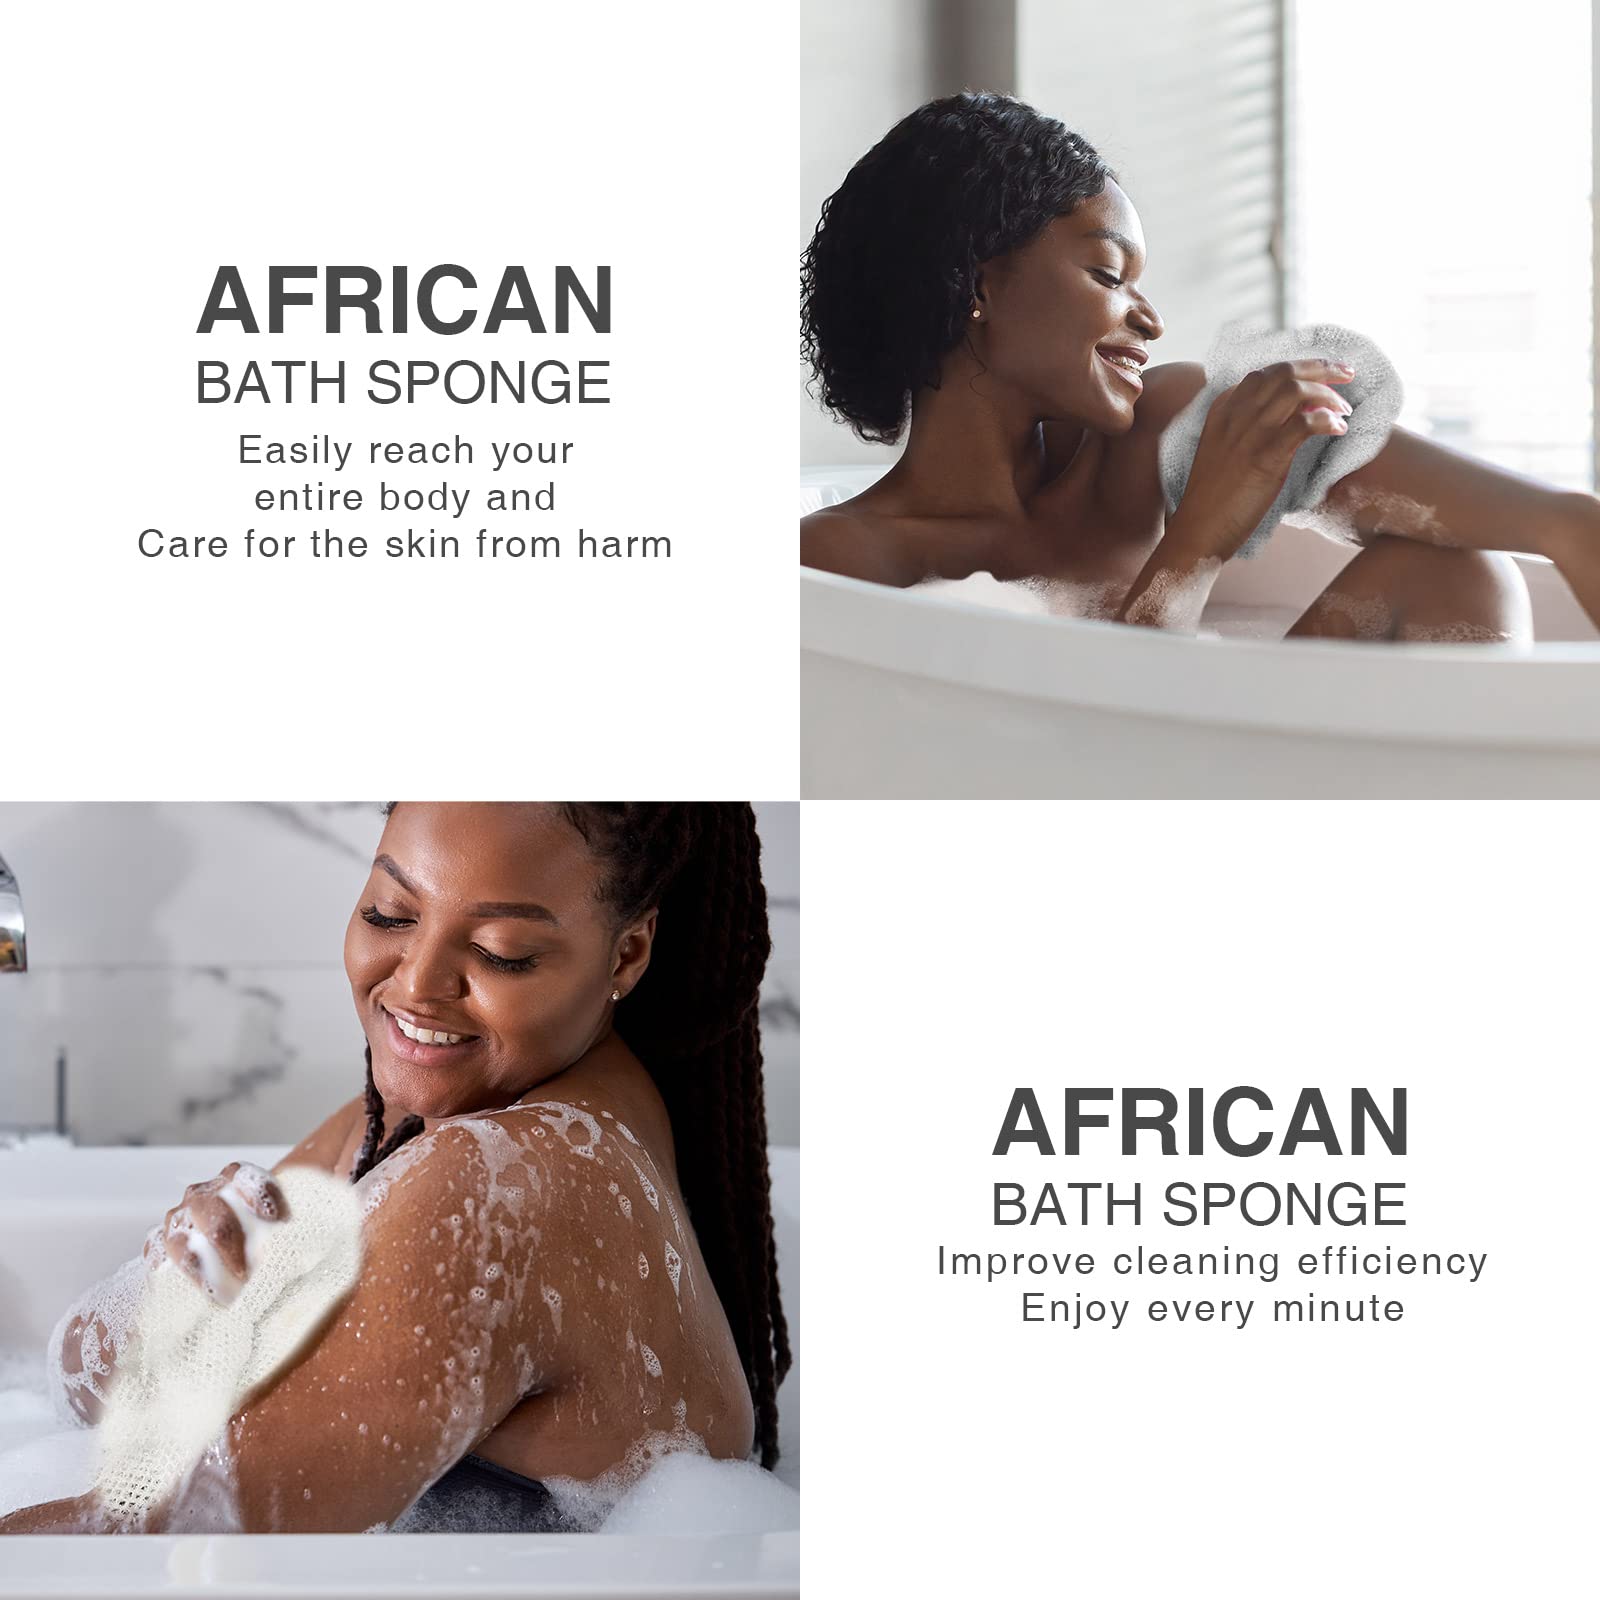 3 Pieces African Bath Sponge African Net Long Net Bath Sponge Exfoliating Shower Body Scrubber Back Scrubber Skin Smoother,Great for Daily Use (Purple,Blue,Off-White)